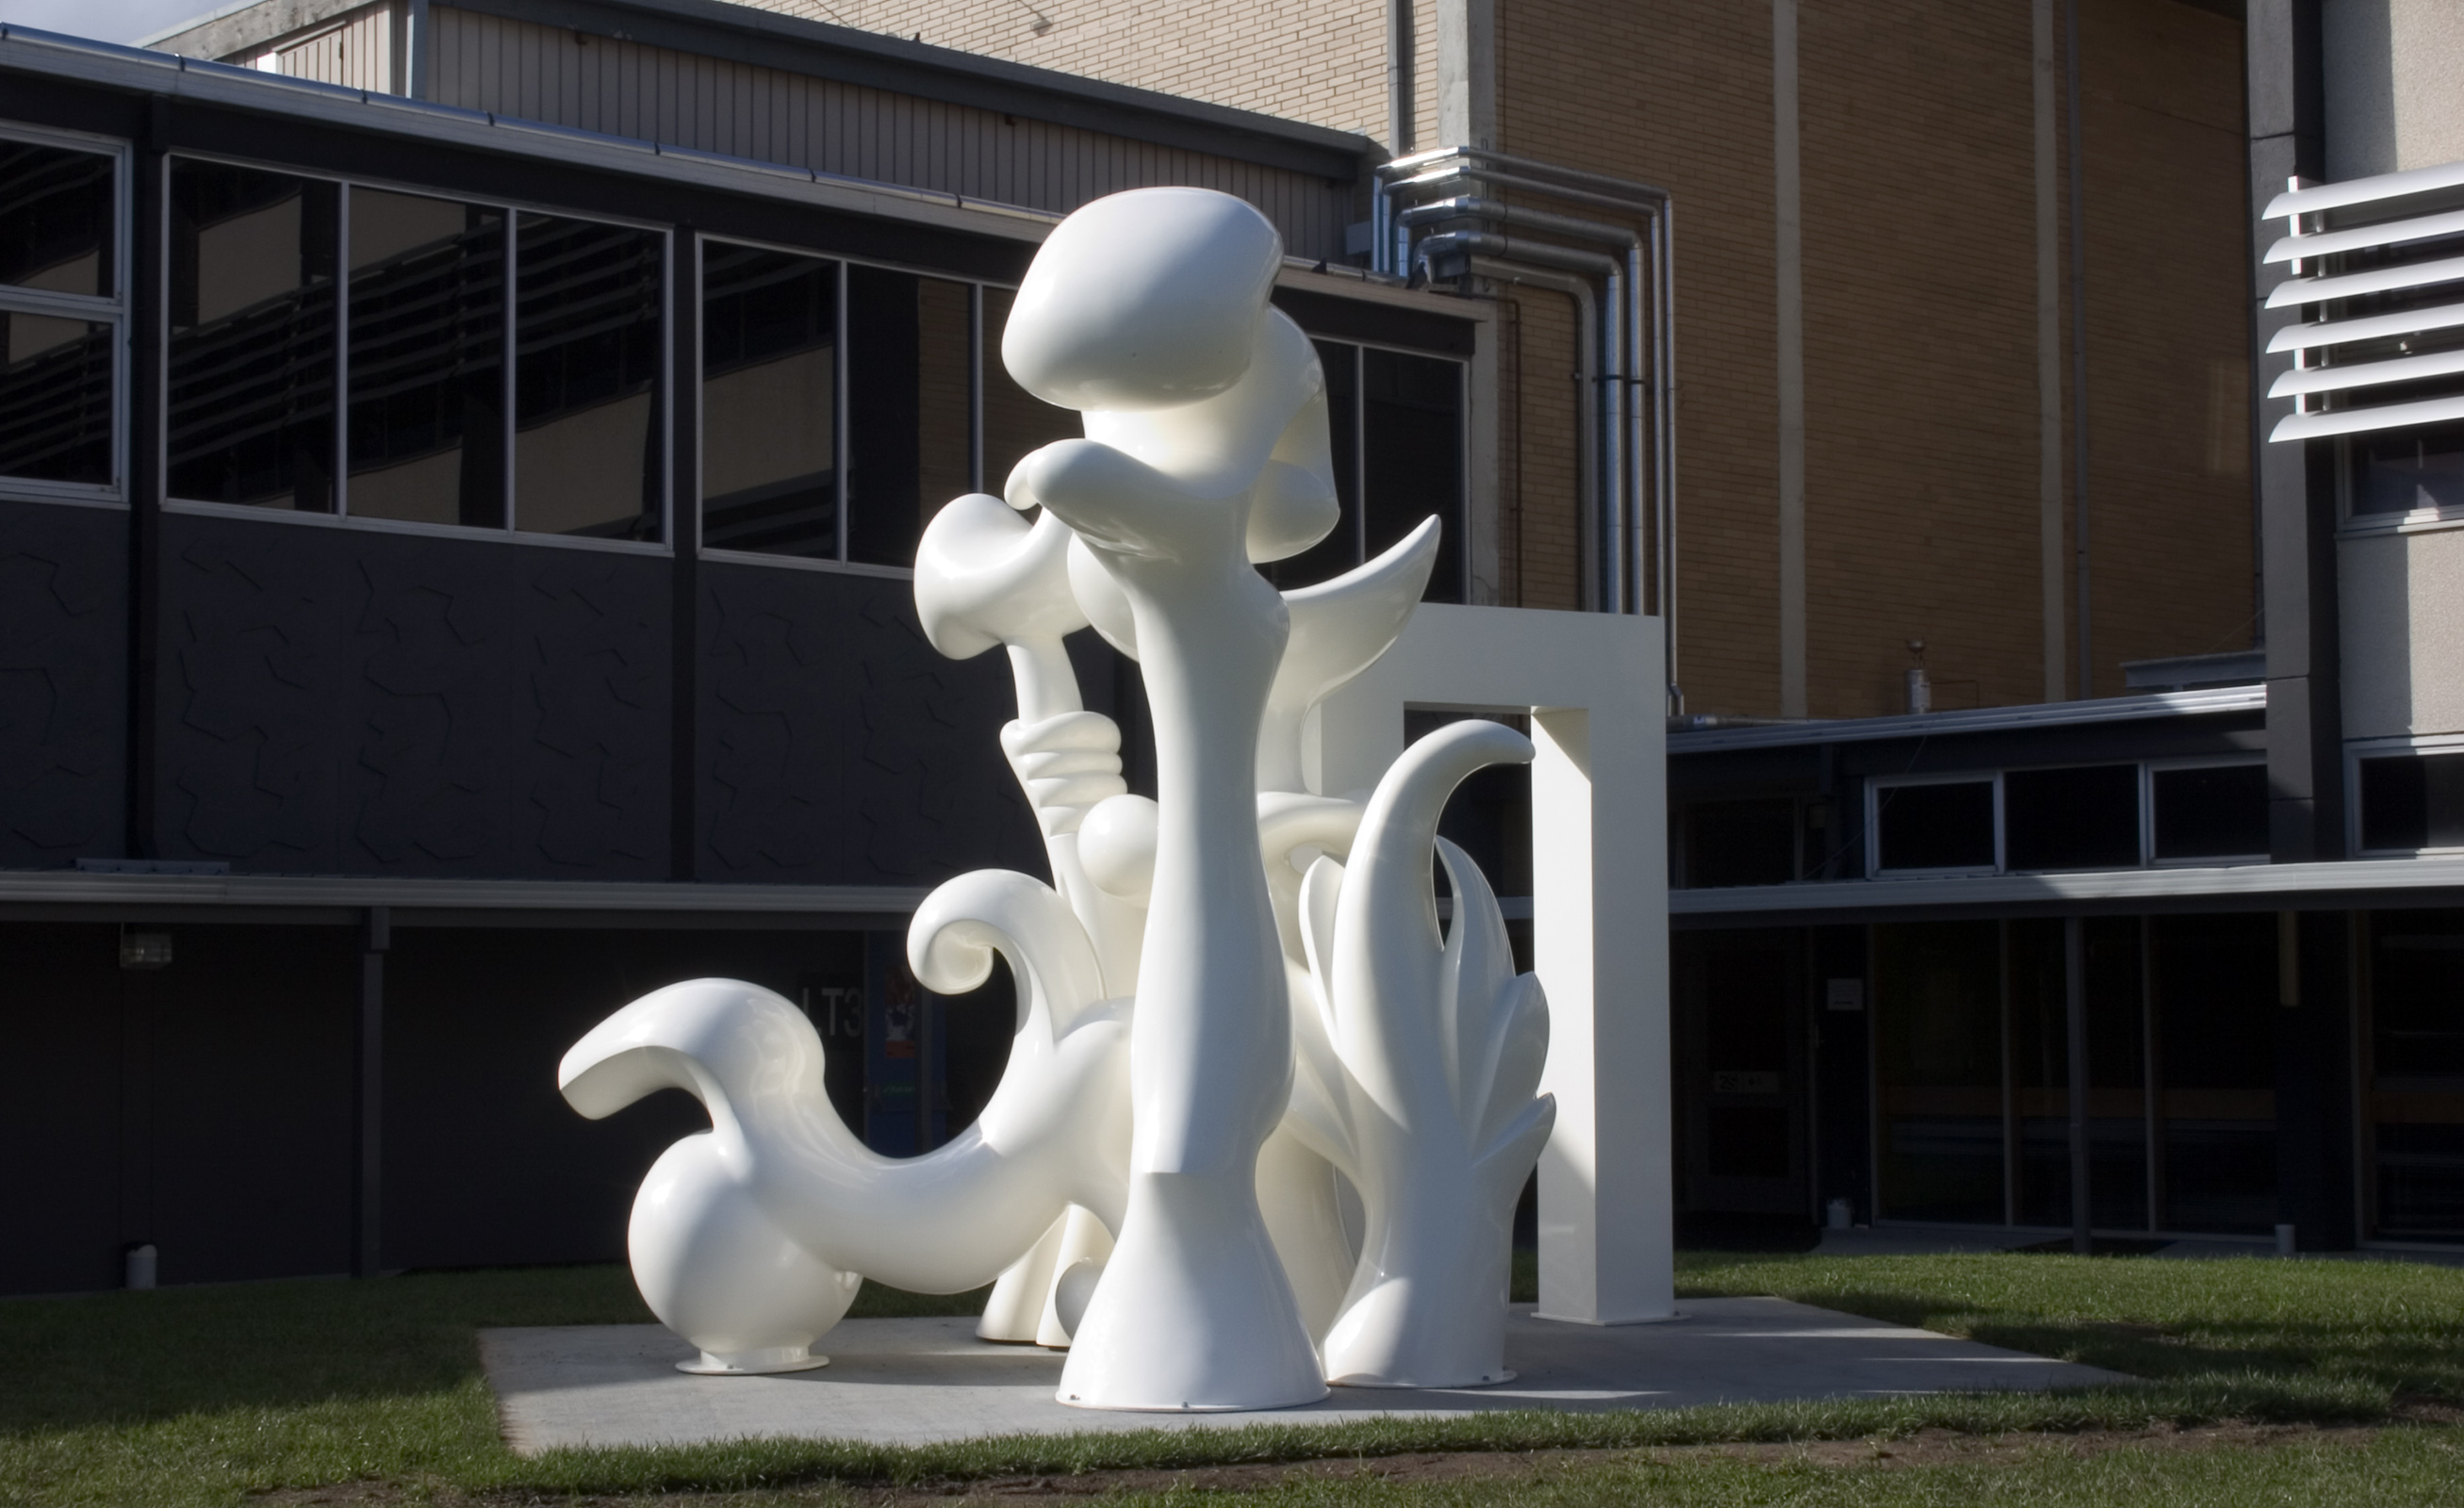 Compilation, 2003. Sculpture by Adrian Mauriks.